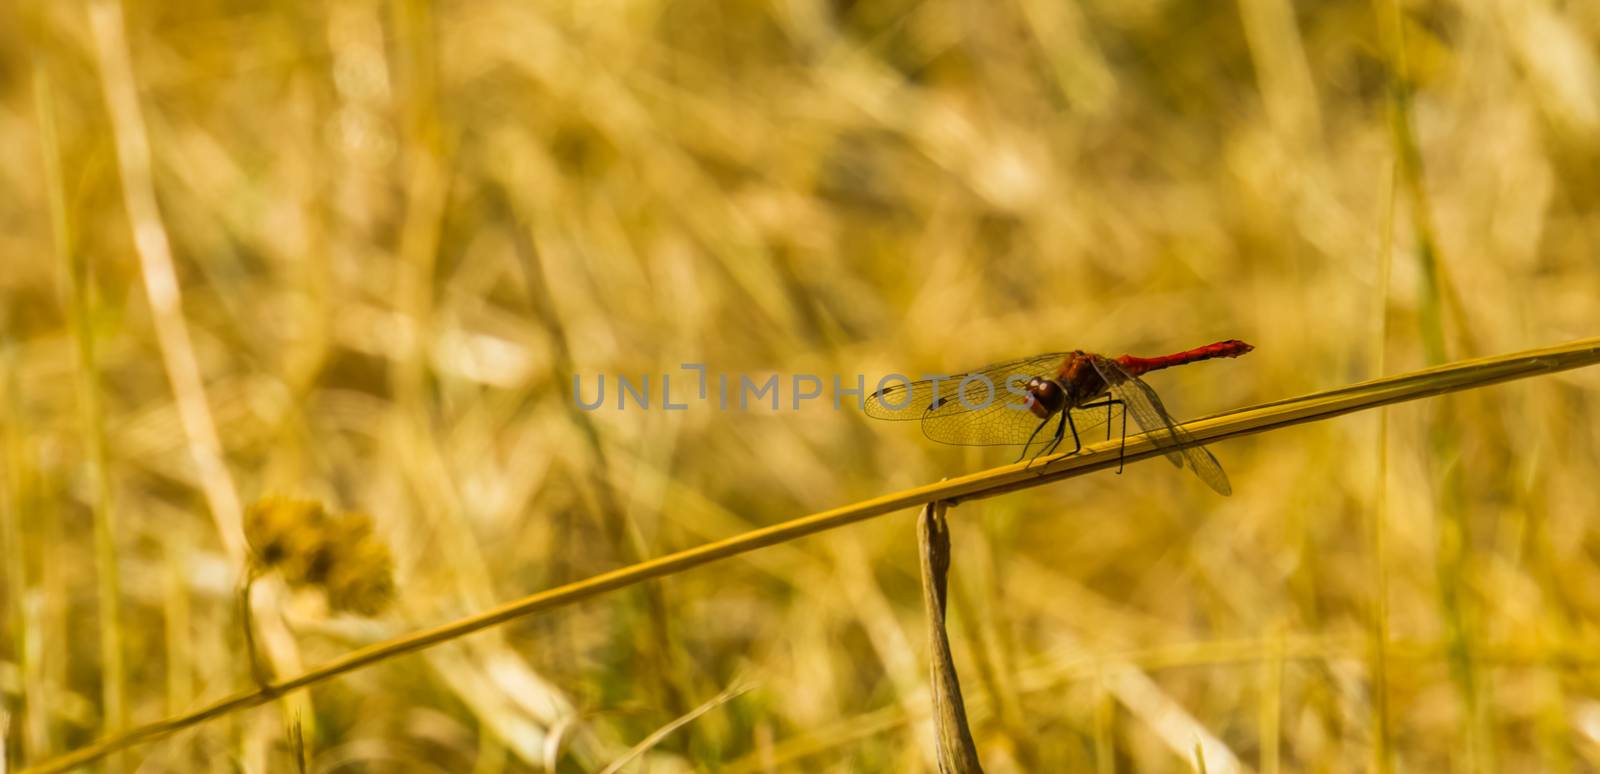 beautiful closeup of a ruddy darter sitting on a blade of grass, fire red dragonfly, common insect specie from Europe by charlottebleijenberg